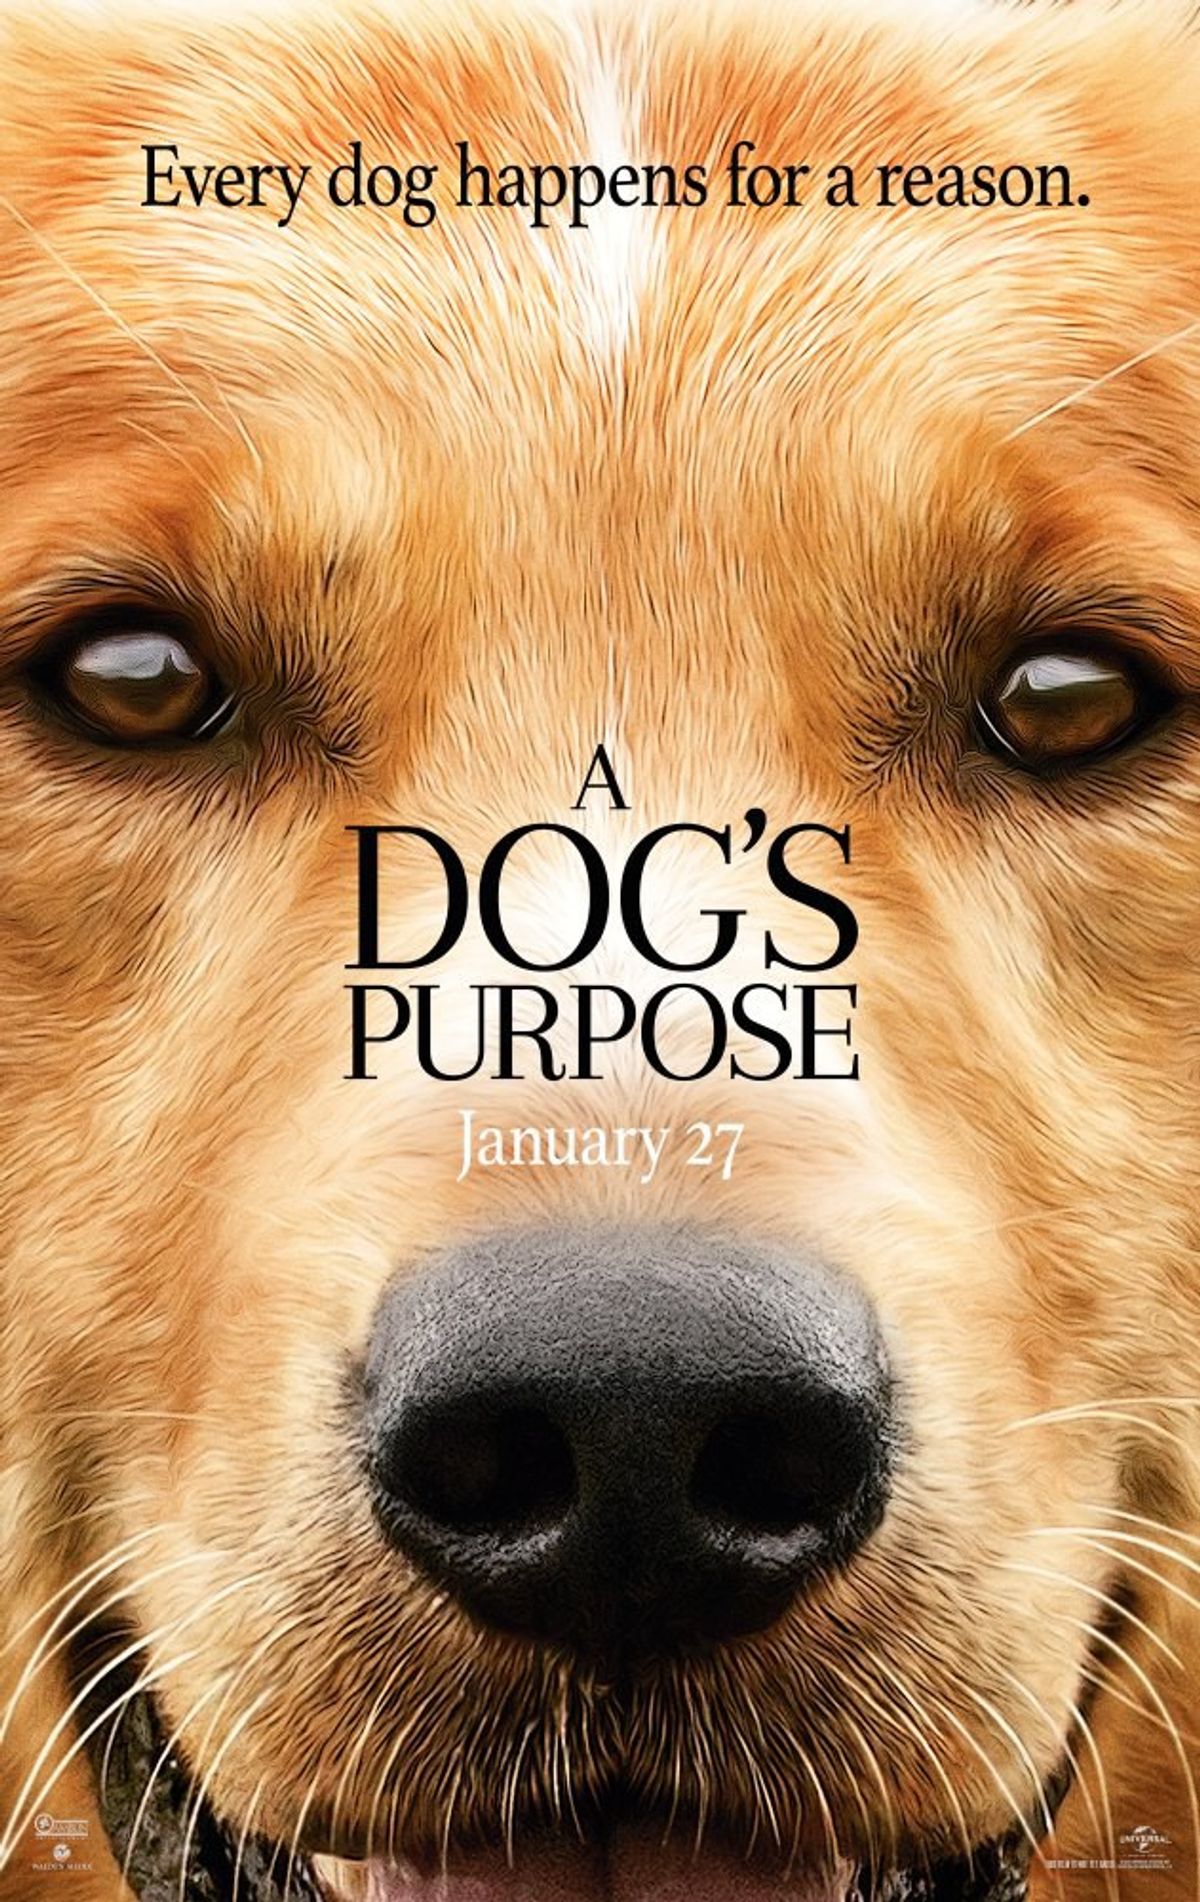 A Dog's Purpose: 7 Differences Between the Movie and the Book